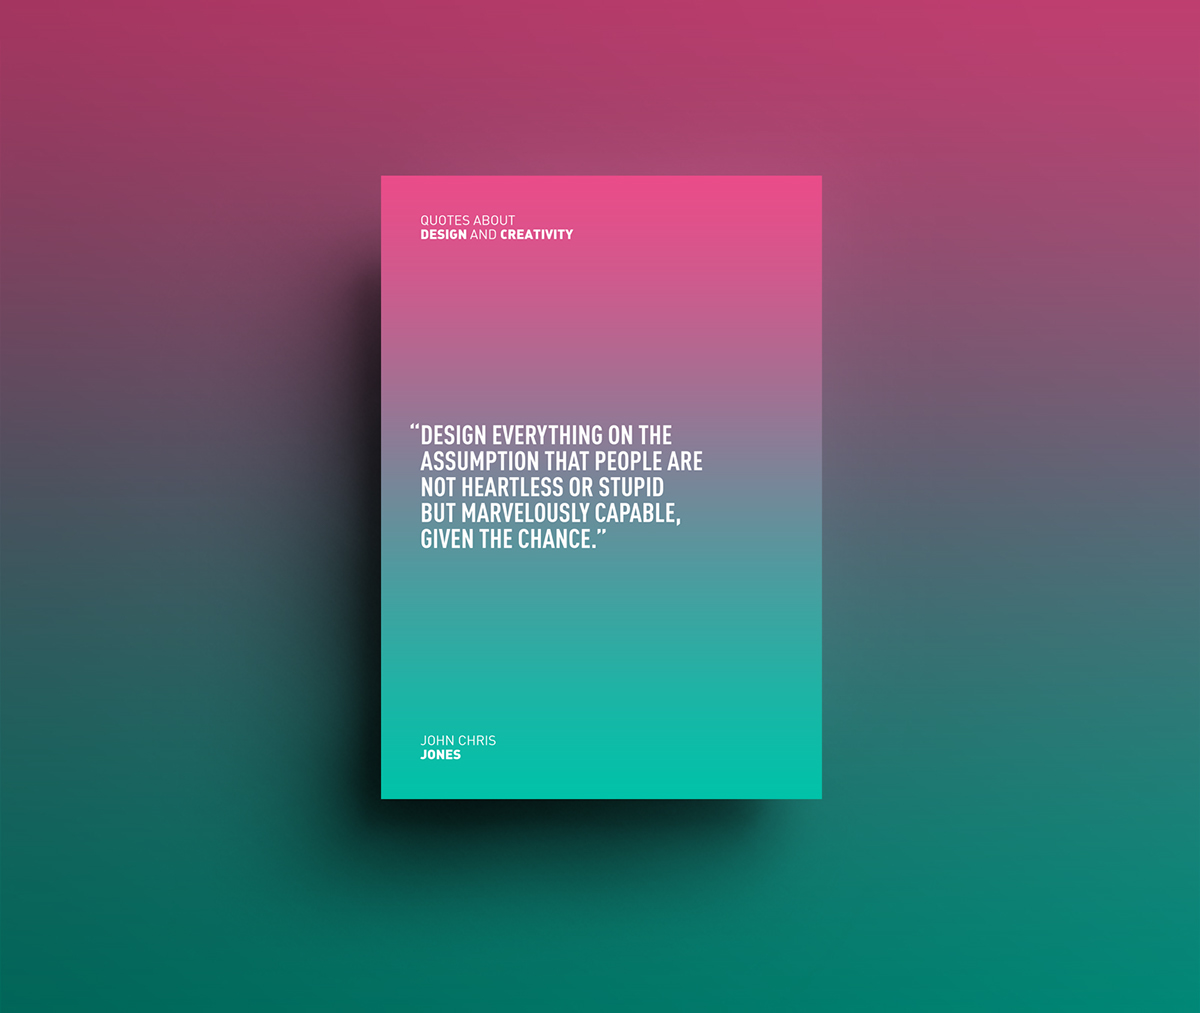 Design and Creativity Quotes on Behance